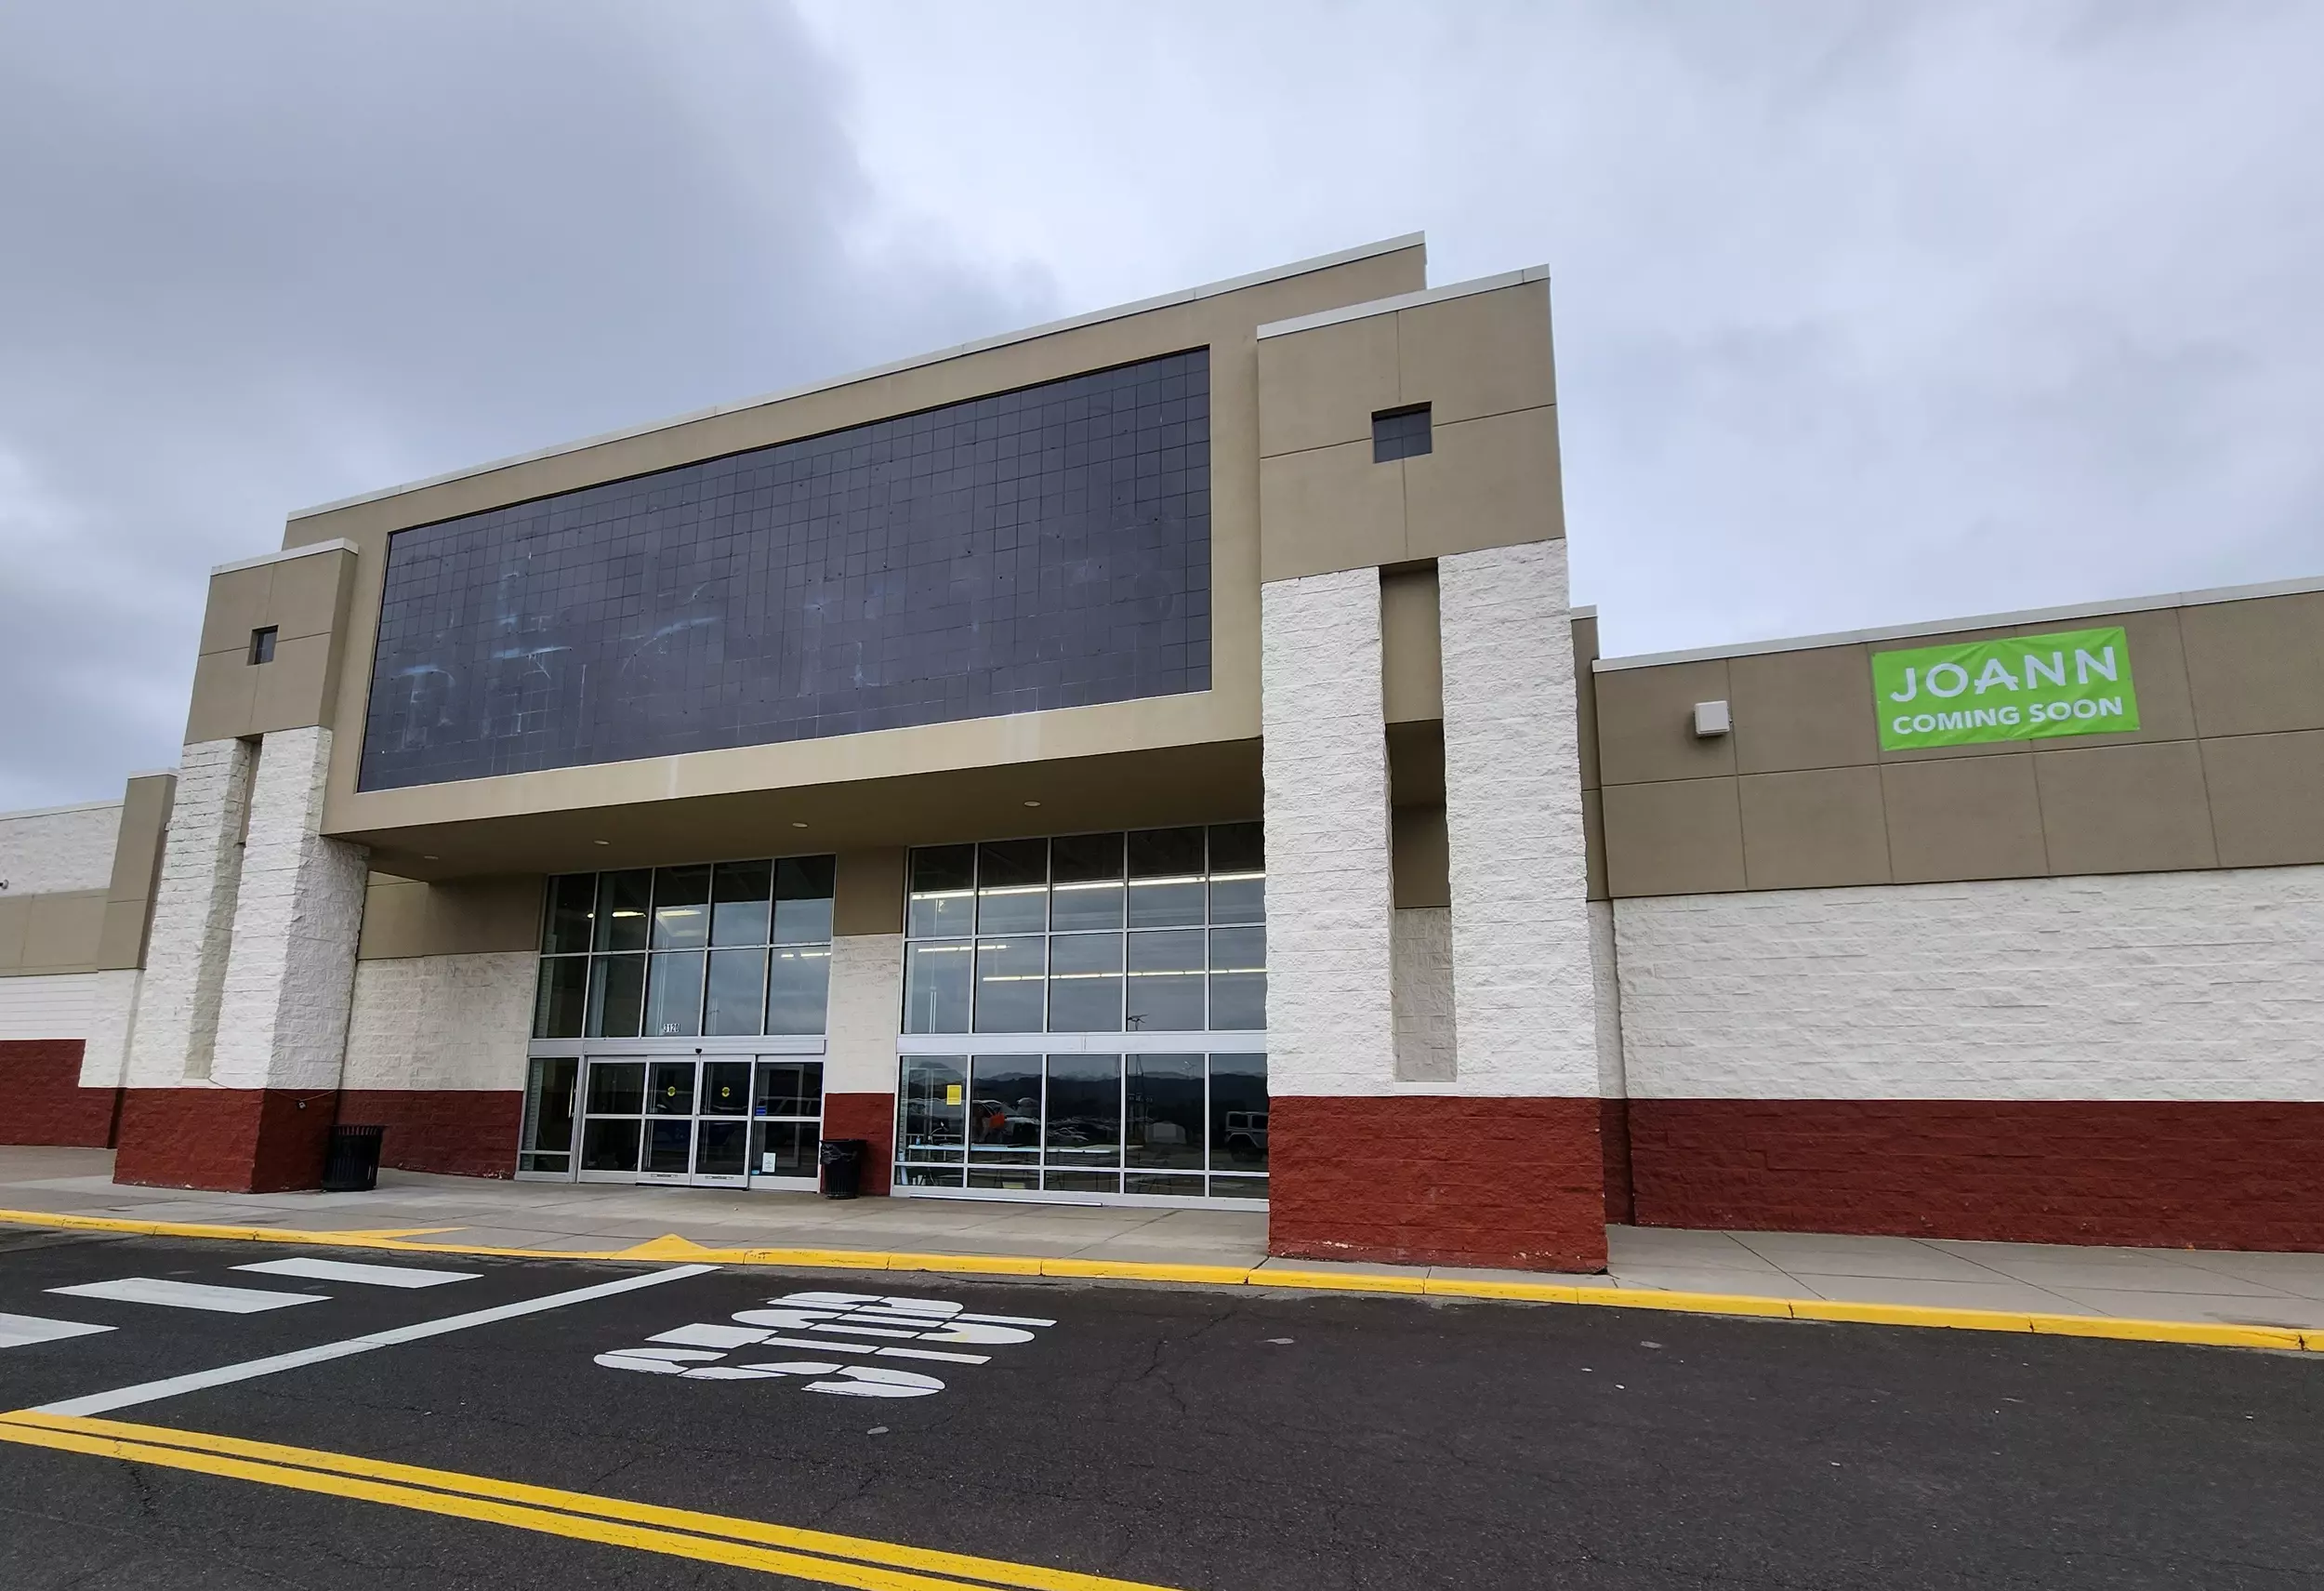 The new BJ's Wholesale Club in Commack opens Jan. 7 in old Macy's spot